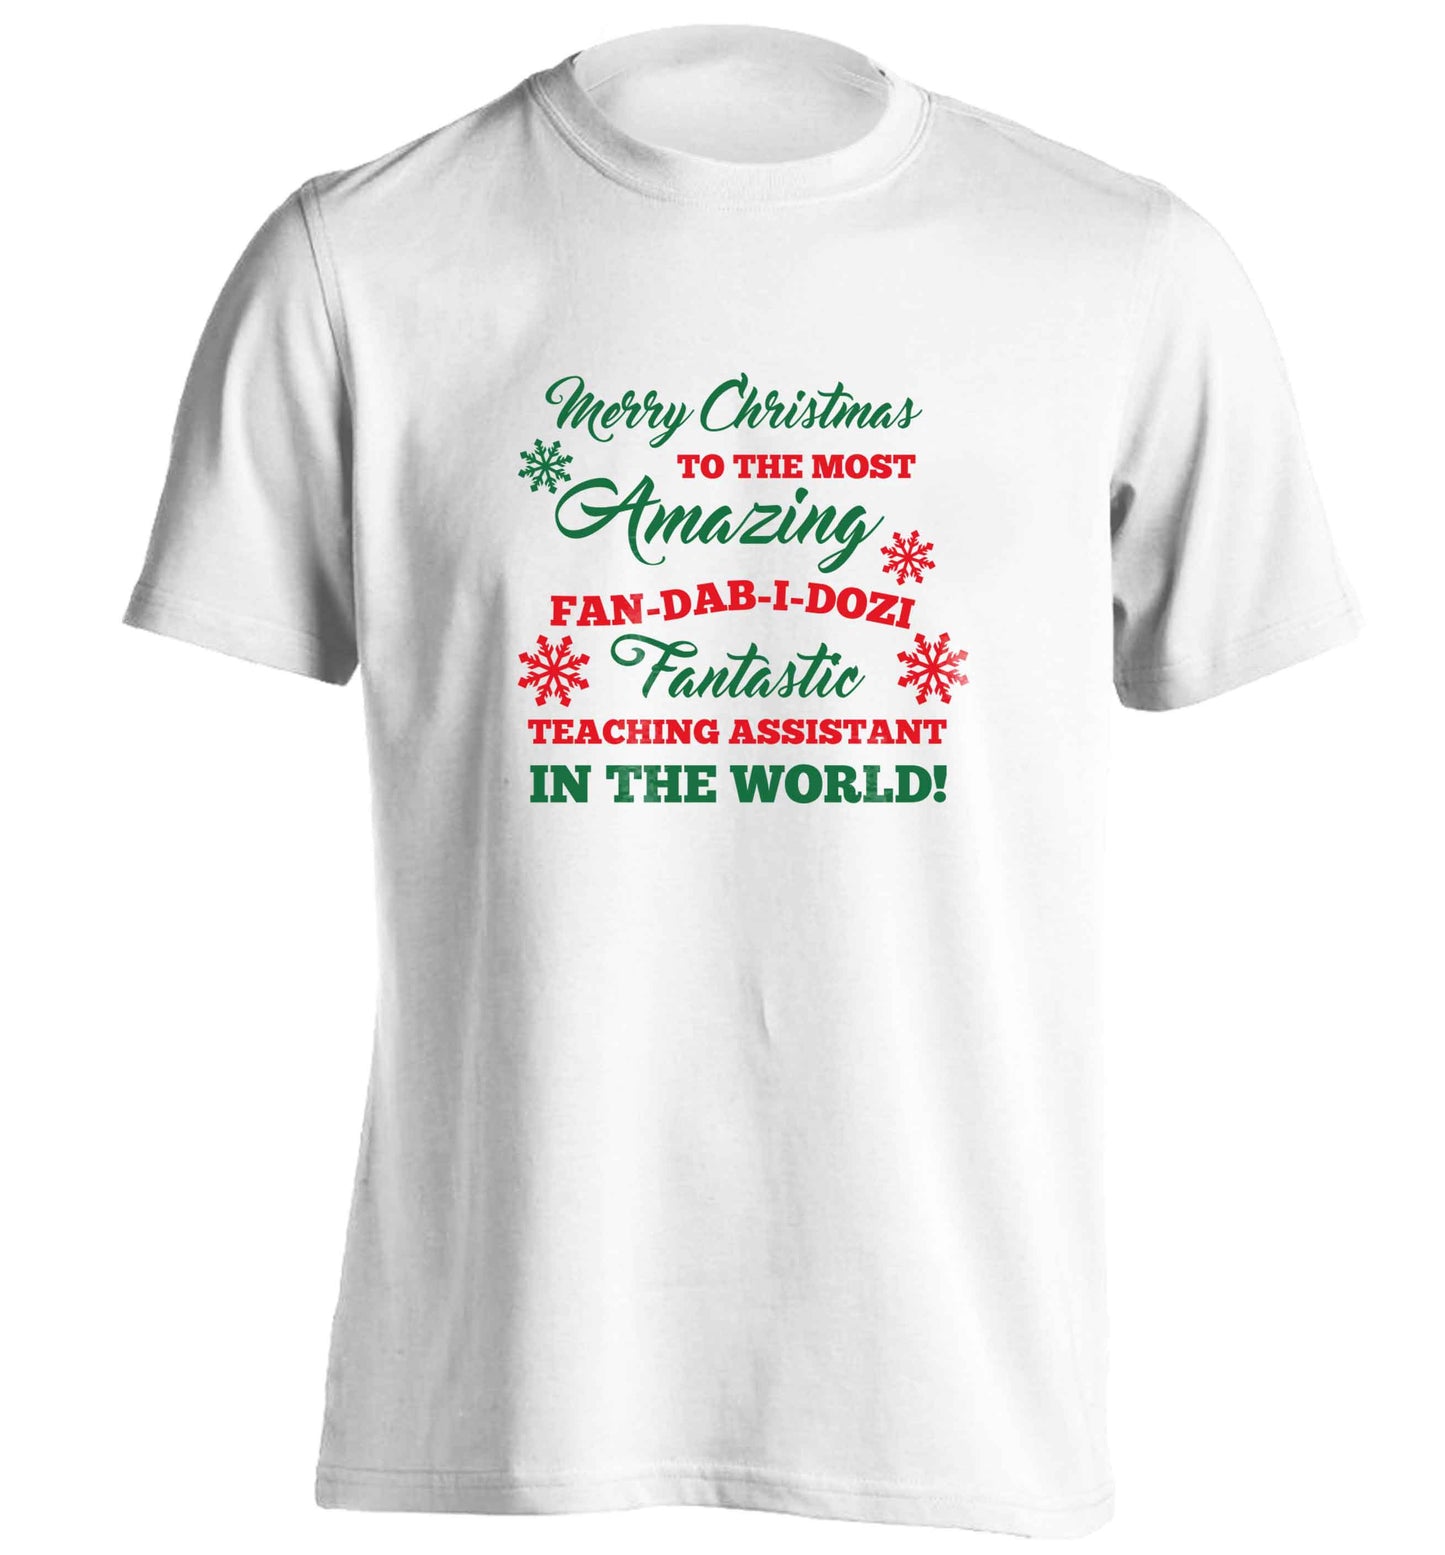 Merry Christmas to the most amazing fan-dab-i-dozi fantasic teaching assistant in the world adults unisex white Tshirt 2XL